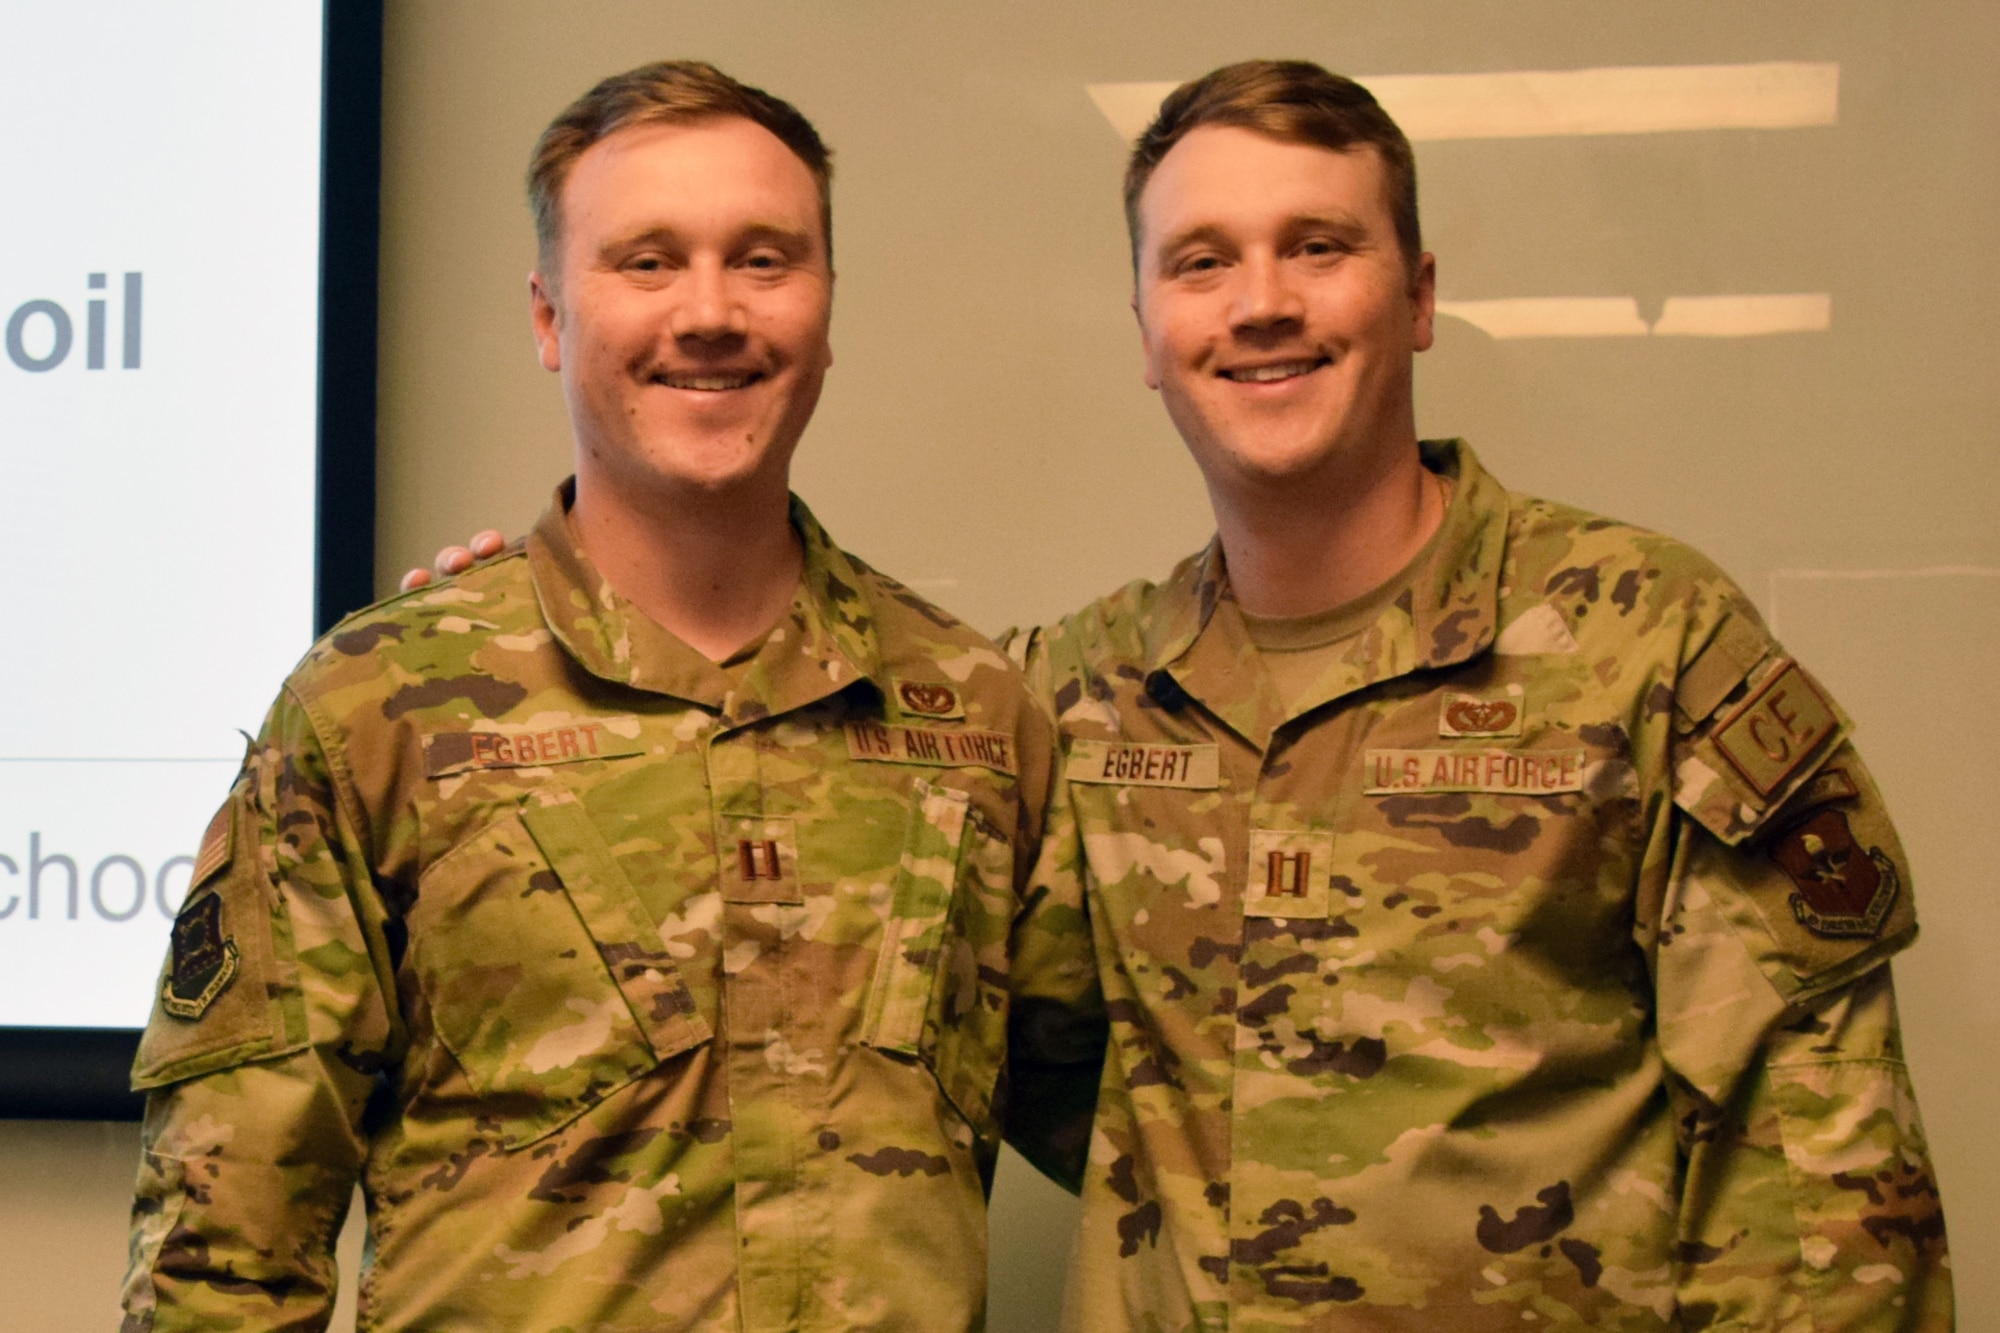 Identical twins, Capts. Connor and Kyle Egbert, serve as pavement instructors at the Air Force Institute of Technology’s Civil Engineer School. (US Air Force photo by Katie Scott)